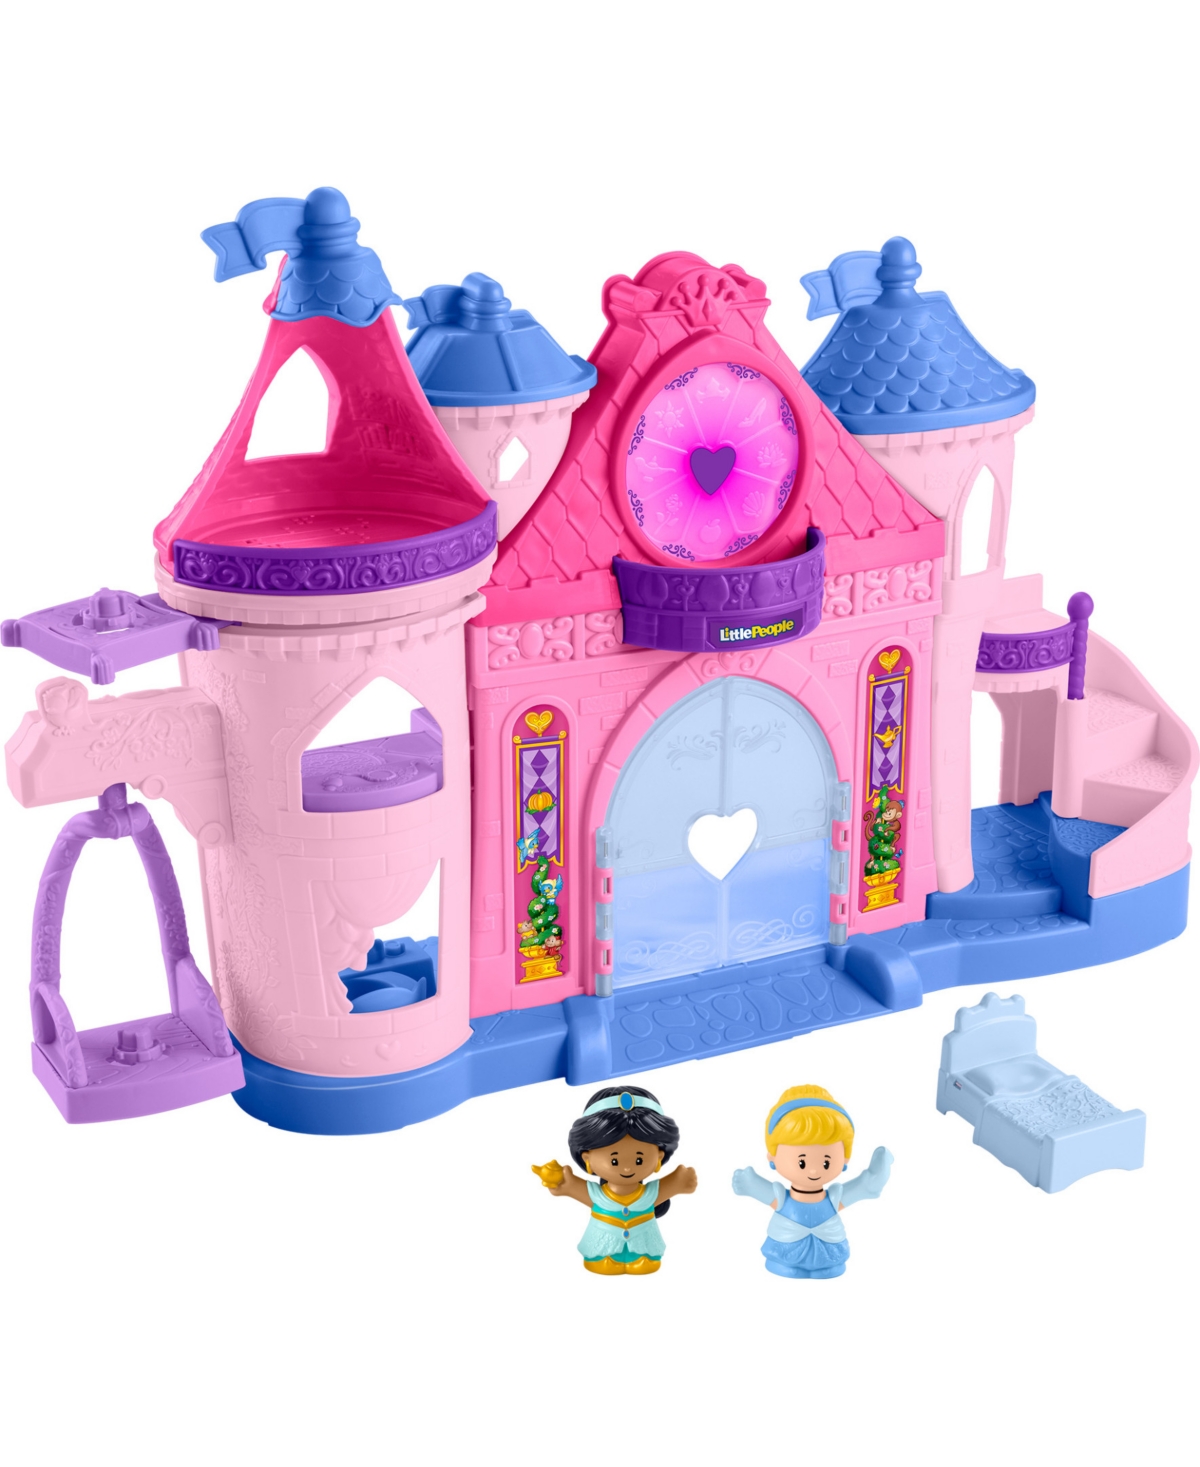 Fisher Price Kids' Little People Disney Princess Magical Lights Dancing Castle Toddler Playset In Multi-color